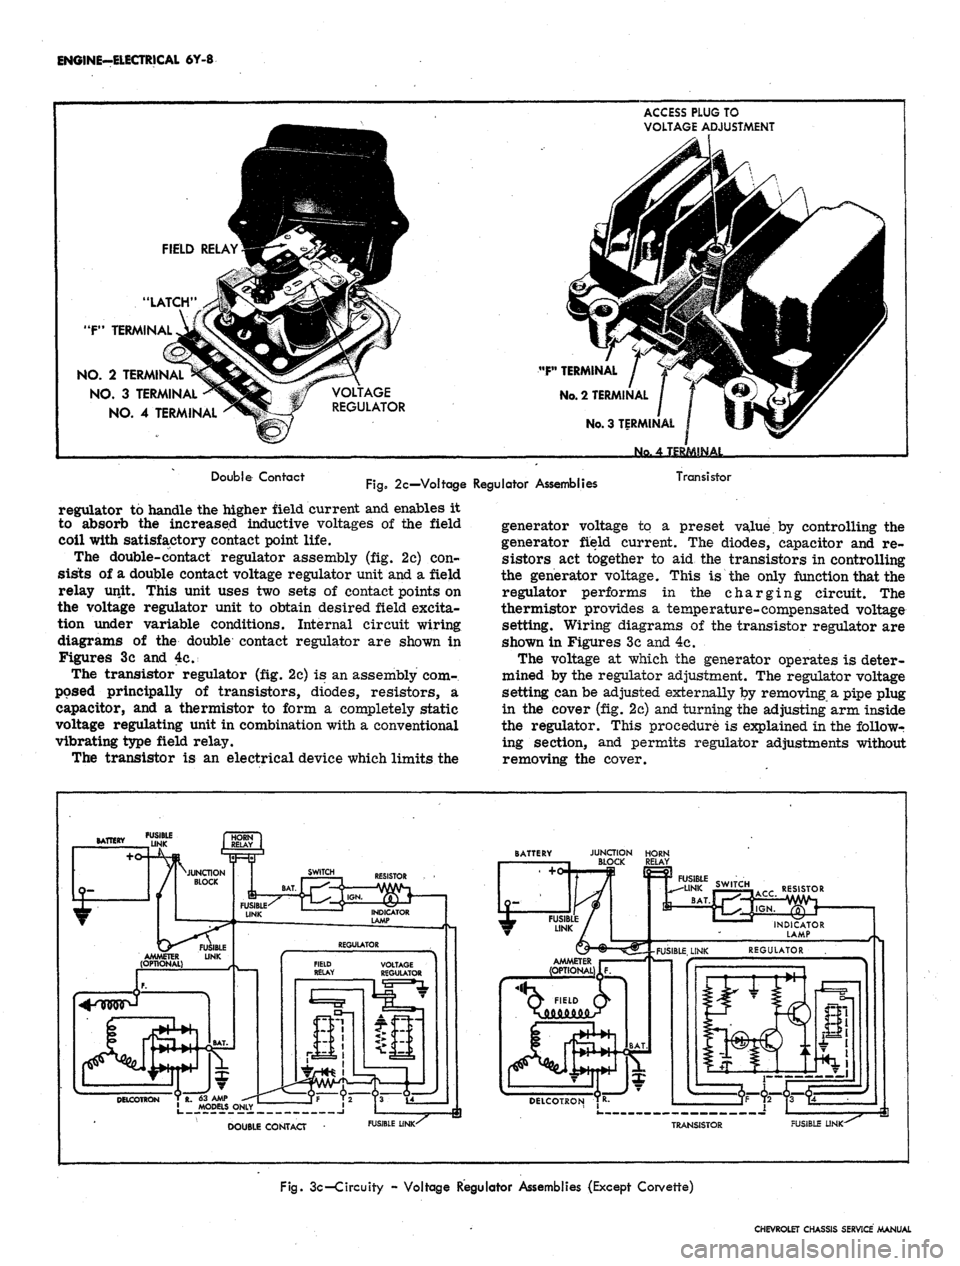 CHEVROLET CAMARO 1967 1.G Chassis Workshop Manual 
ENGINE-ELECTRICAL 6Y-8

1

FIELD RELAY^I^p2

"LATCH"
 ^PFN?^

"P1
 TERMINAL
 JyJvJCTl^

NO. 2 TERMINAD^5^^^«

NO.
 3 TERMINAL ^S5«£

NO.
 4 TERMINAL ^^^ 
m

# / VOLTAGE

¥ REGULATOR

1 
ACCESS PL